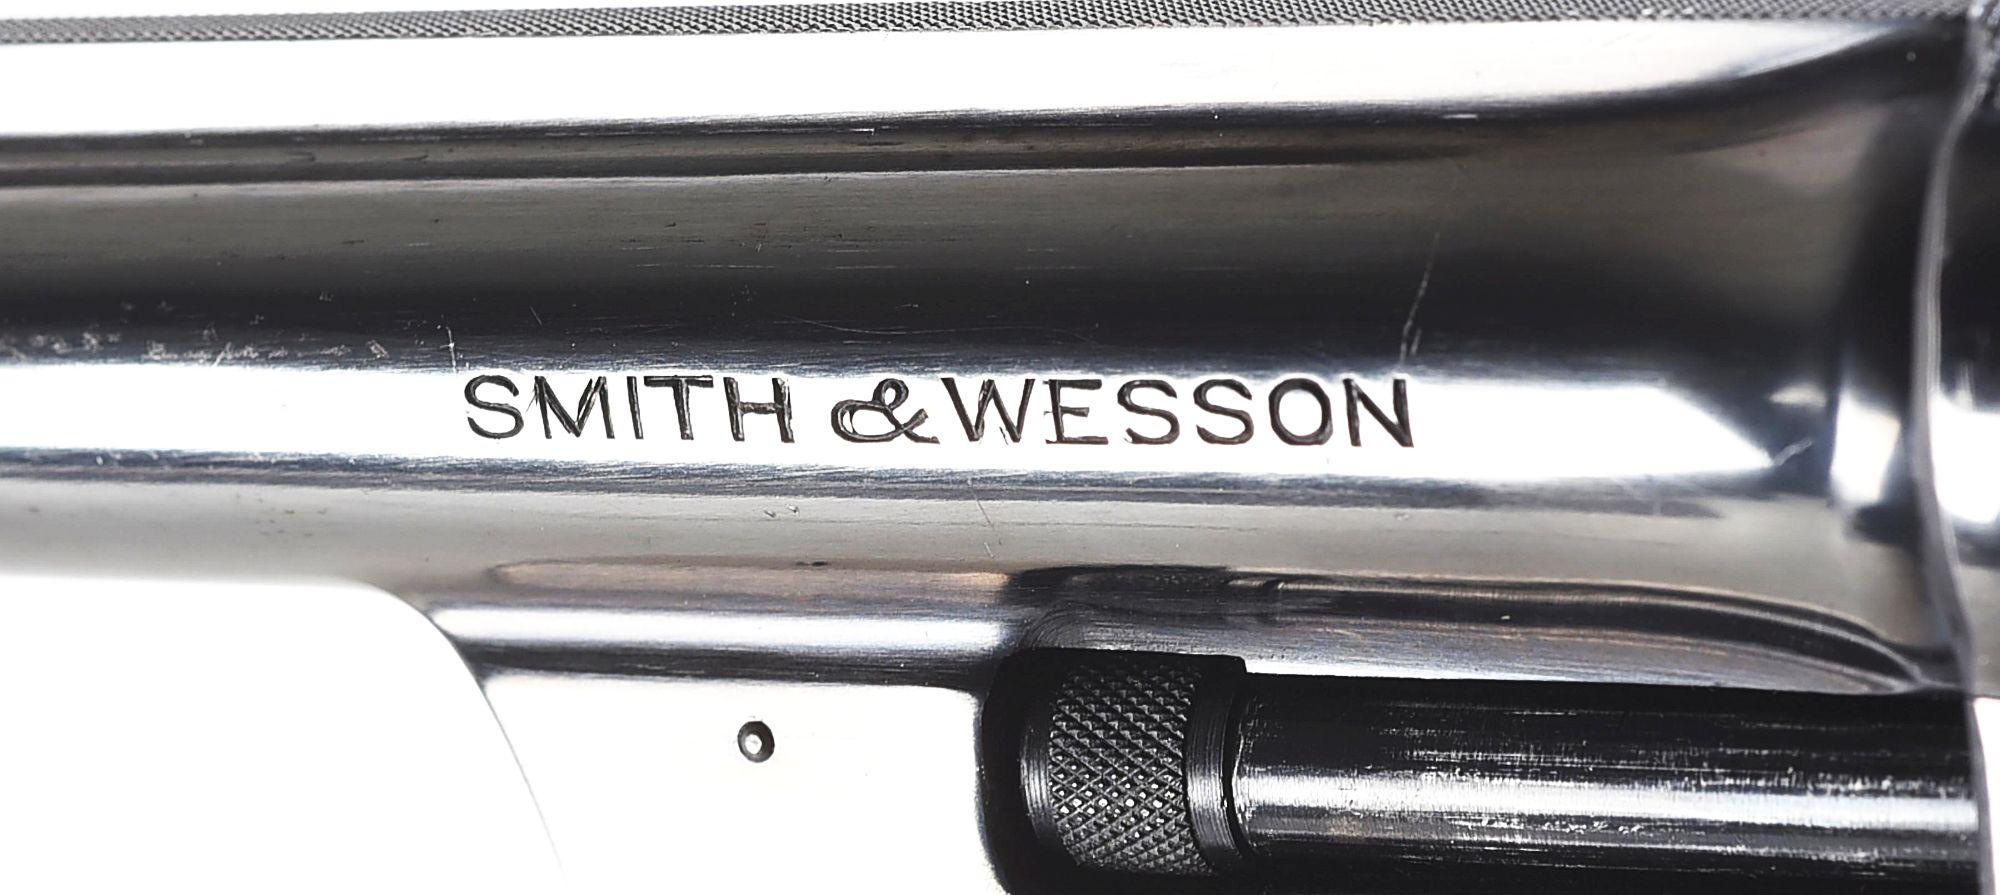 (C) SMITH & WESSON REGISTERED MAGNUM DOUBLE ACTION REVOLVER.